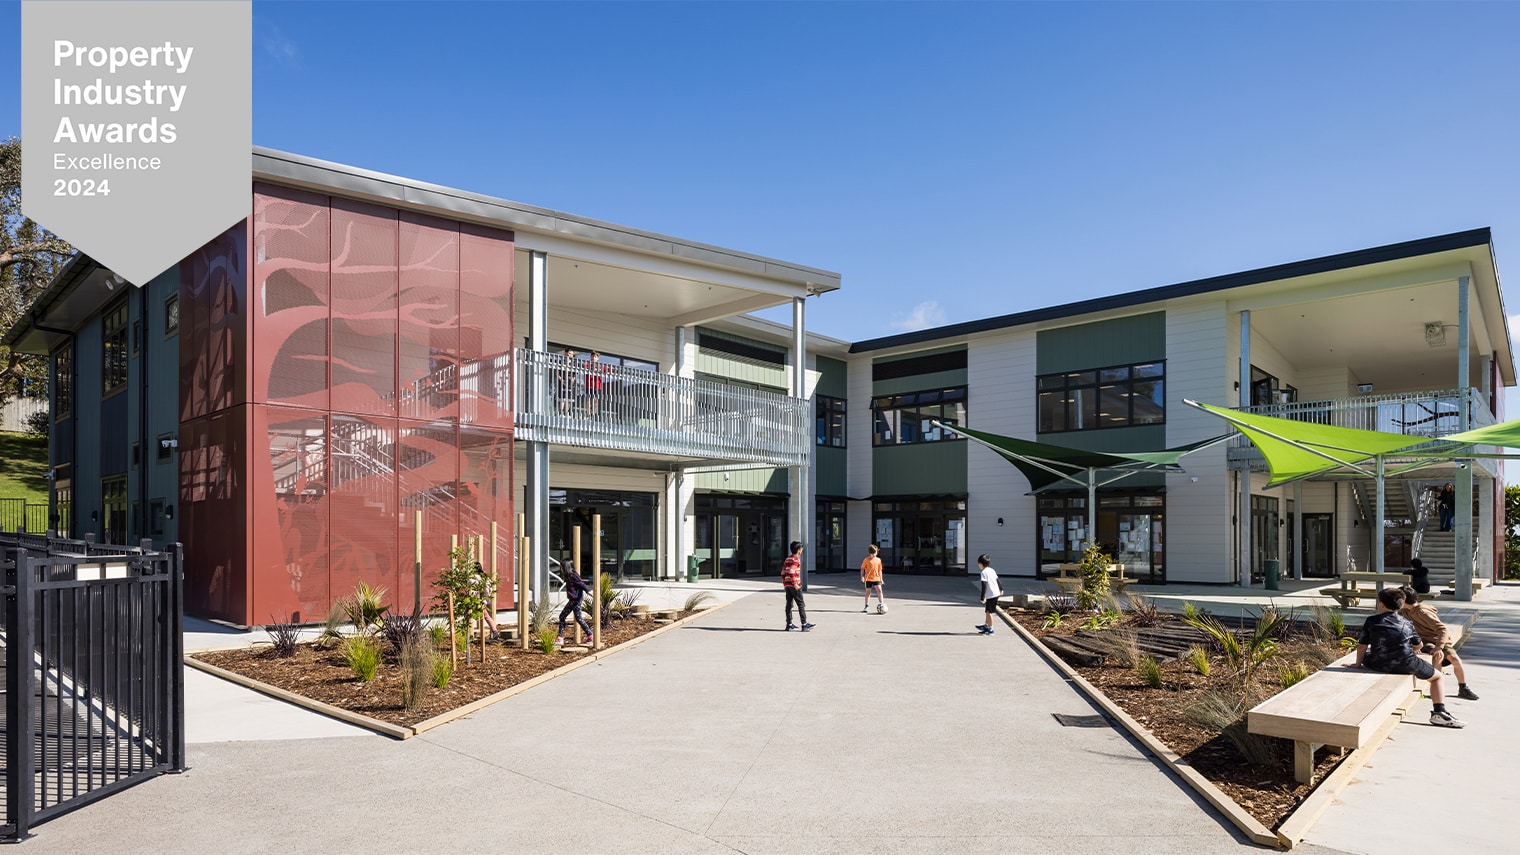 Windy Ridge School – Te Whare Ako wins Excellence Award at PCNZ Property Industry Awards 2024